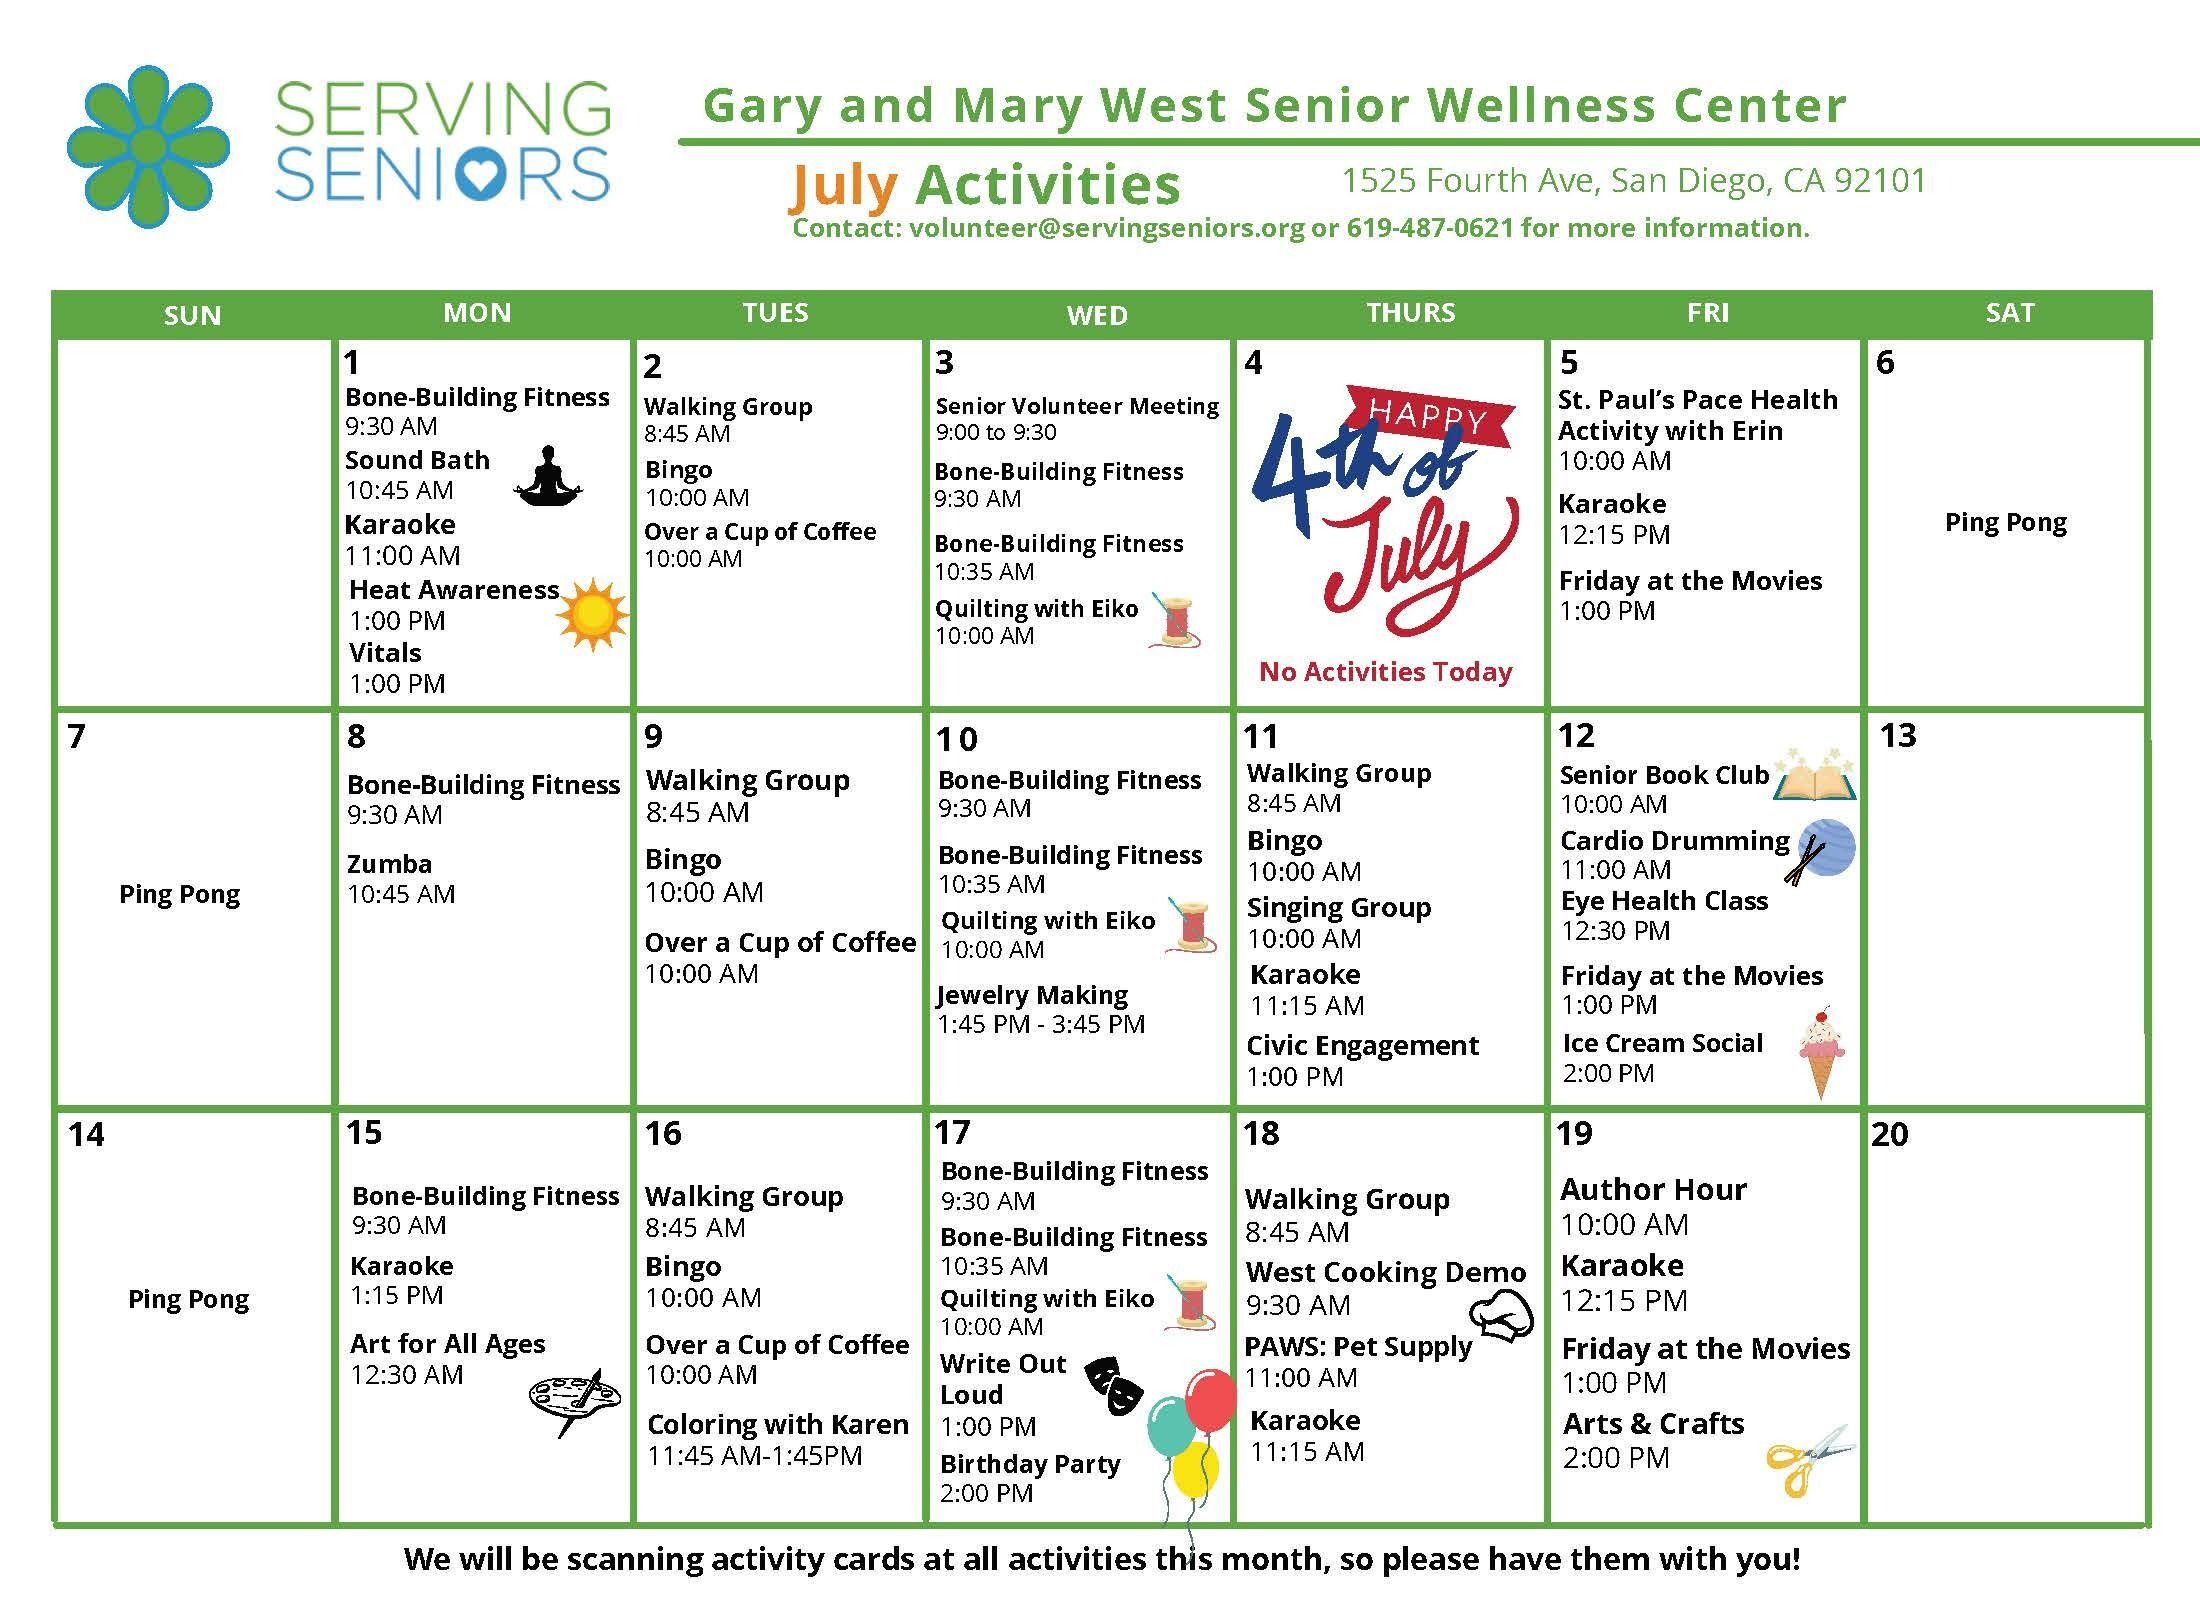 Click to download the Gary and Mary West Senior Wellness Center July Activities Calendar